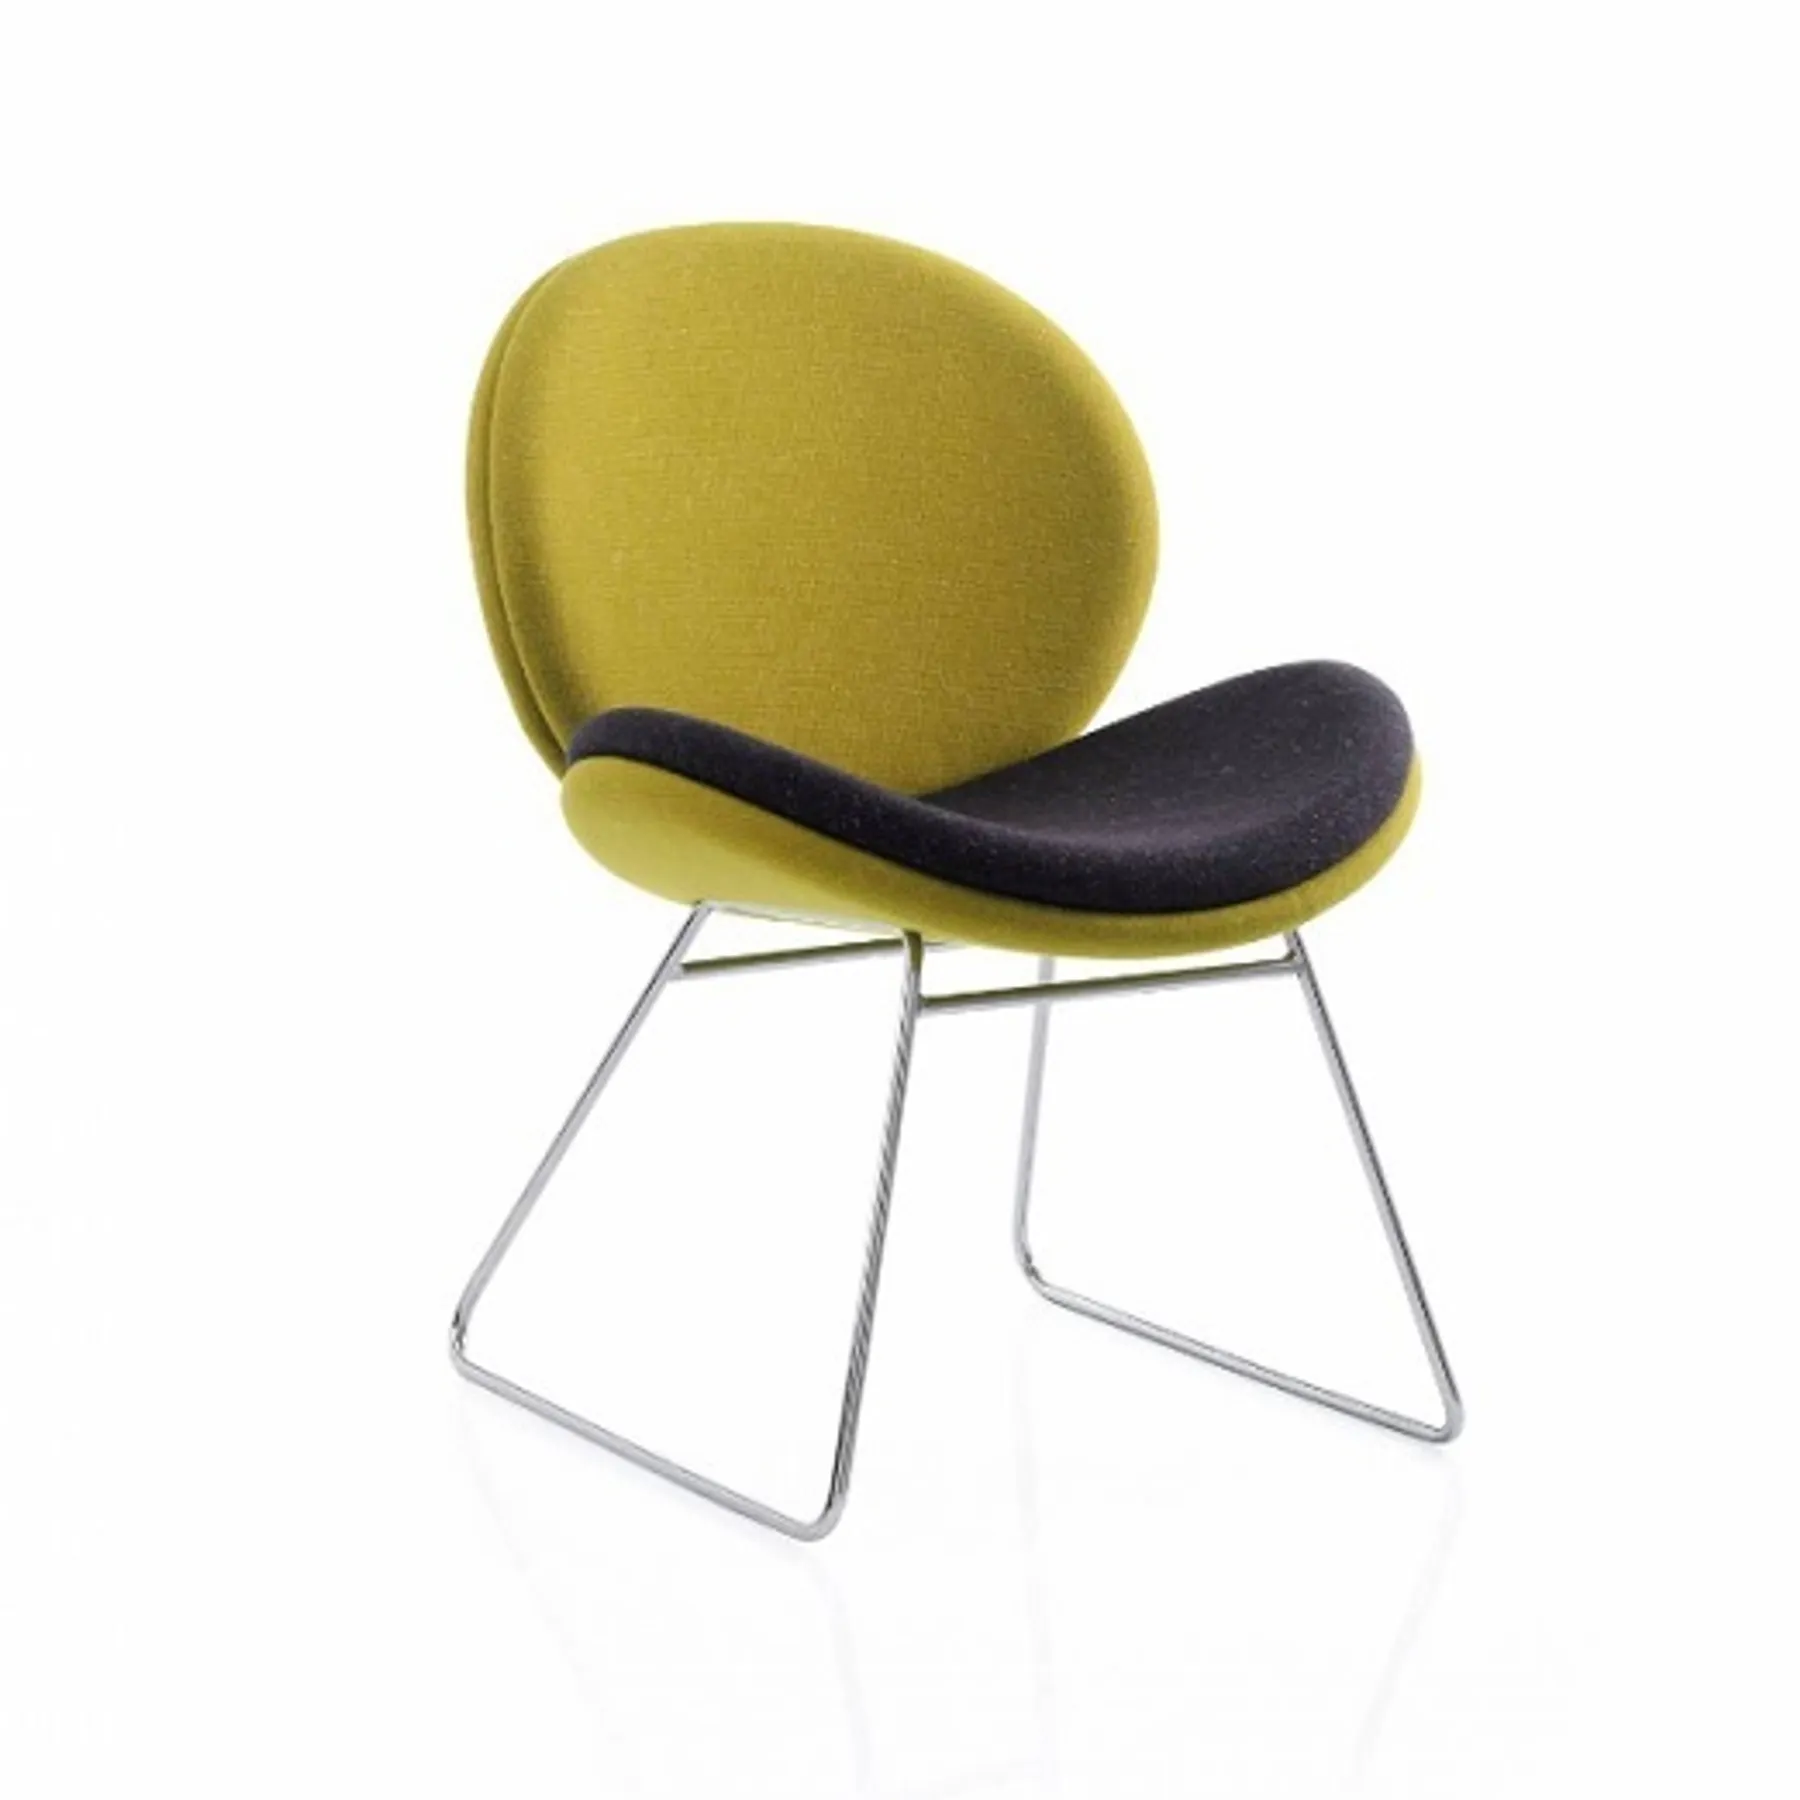 Lof Direct Giggle Chair ocee design giggle2